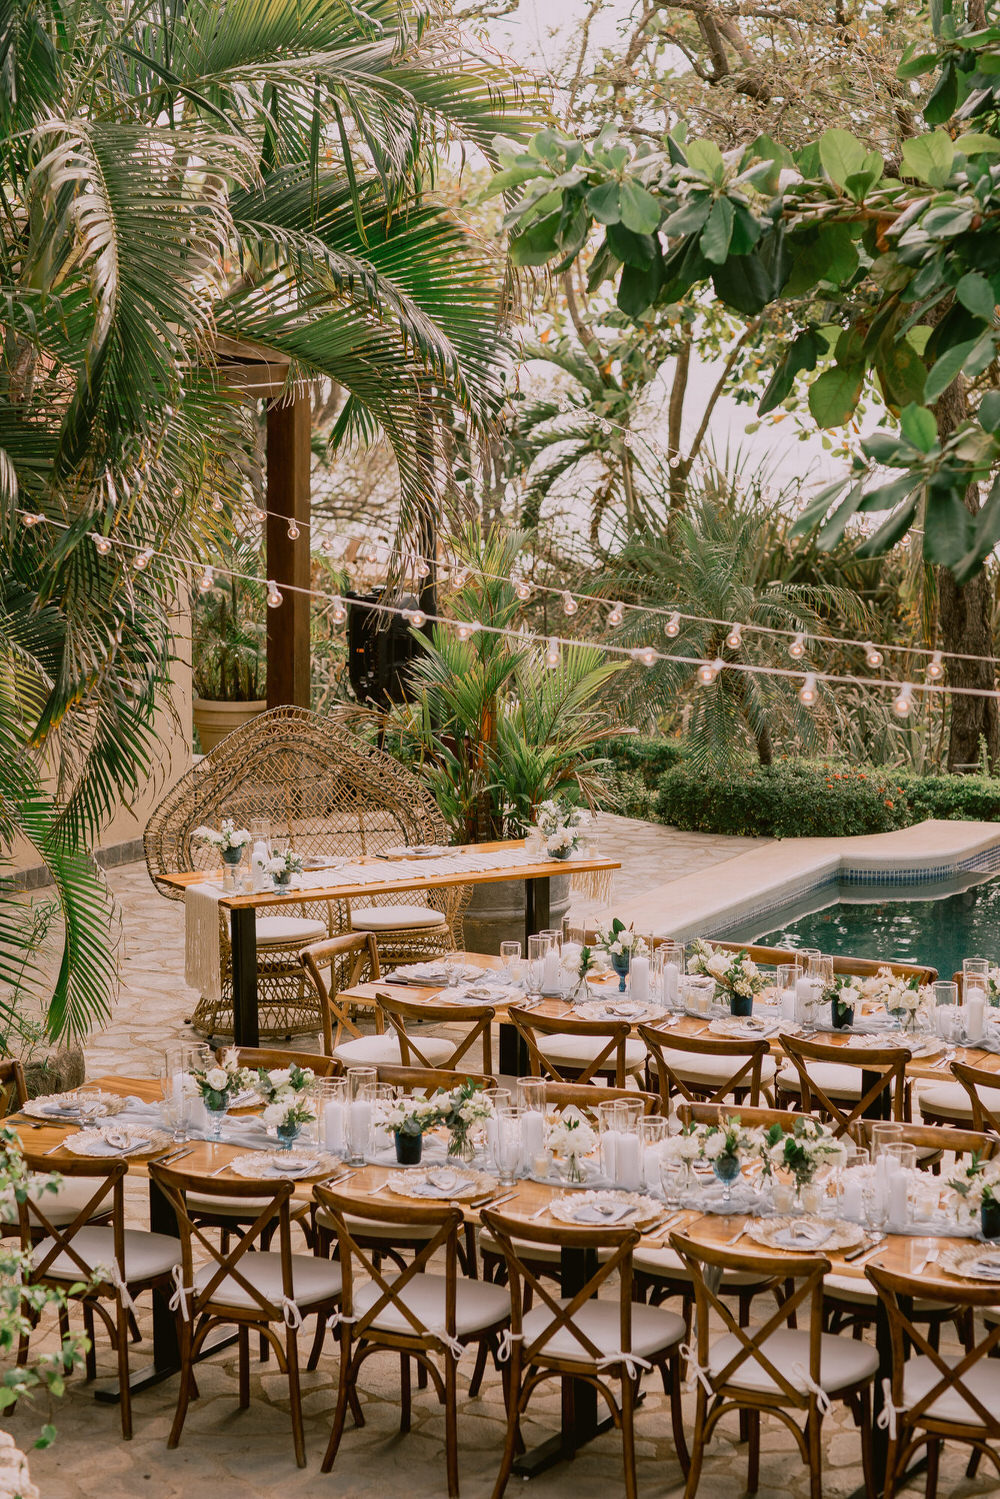 wedding reception decor with market lights by a pool